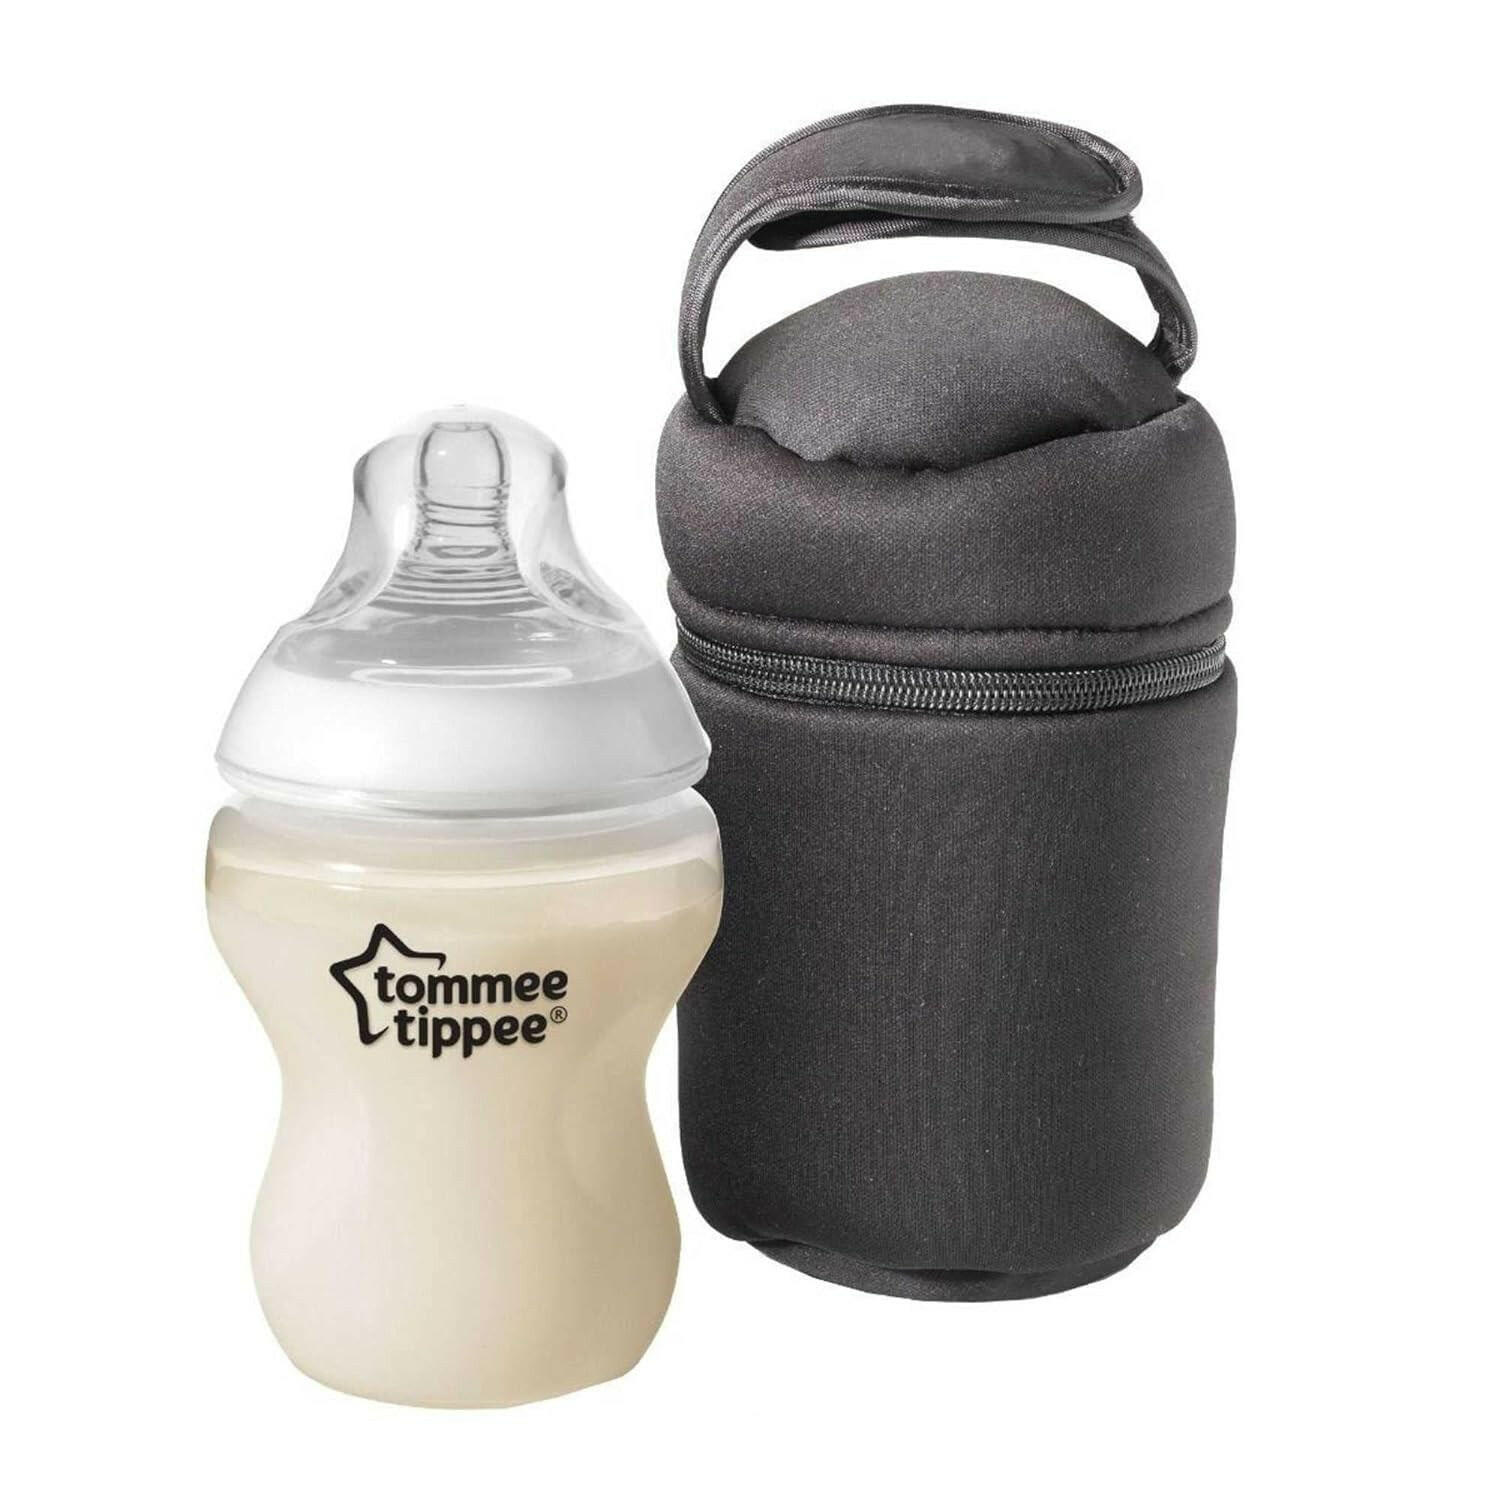 Tommee Tippee Closer to Nature Insulated Bottle Bags, 2 pcs